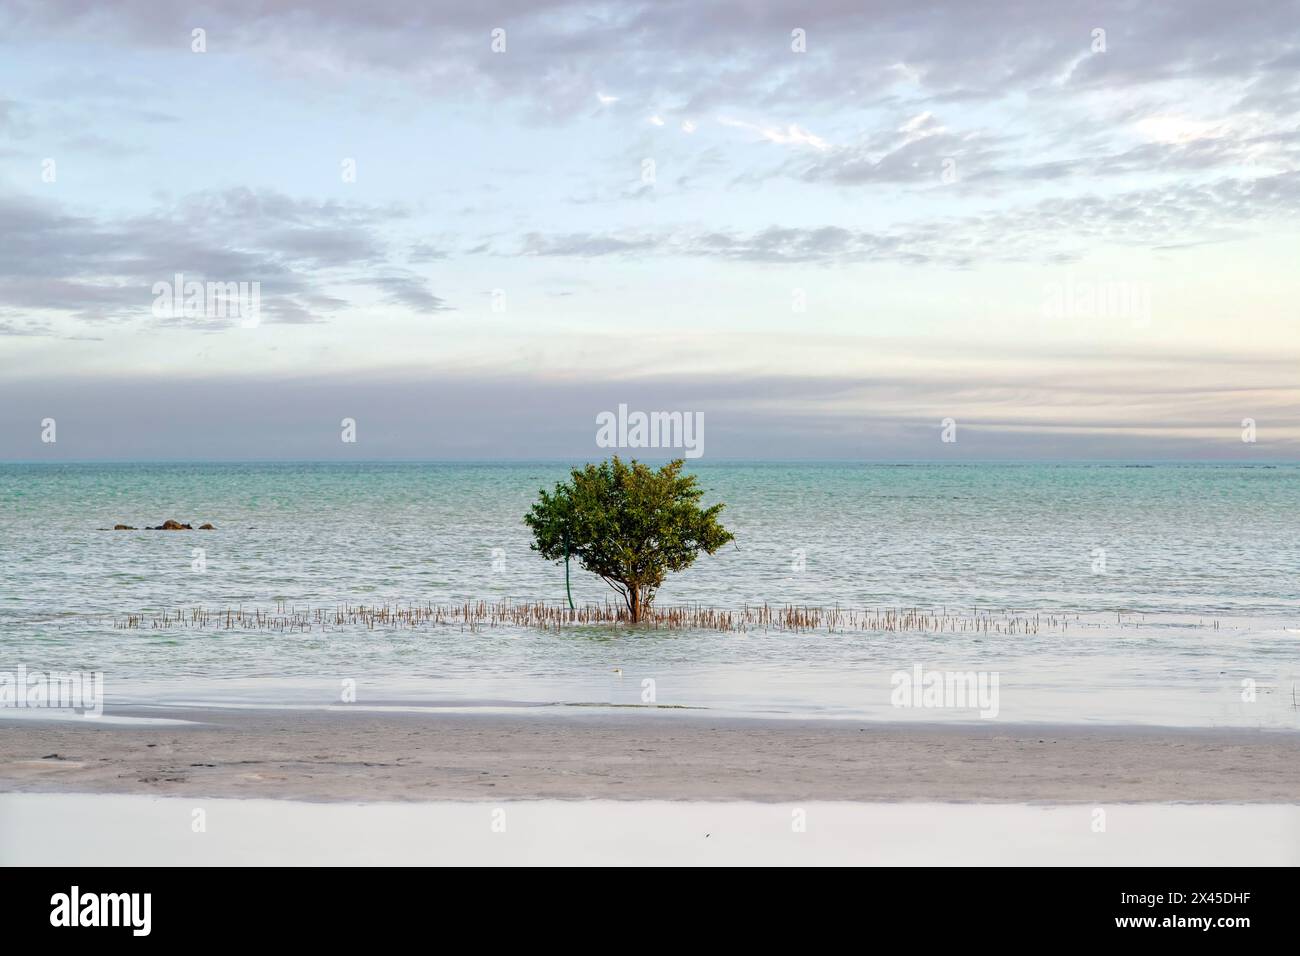 Souq Wakra Beach. Seascape of mangrove Single tree. viewed from the water surface Stock Photo